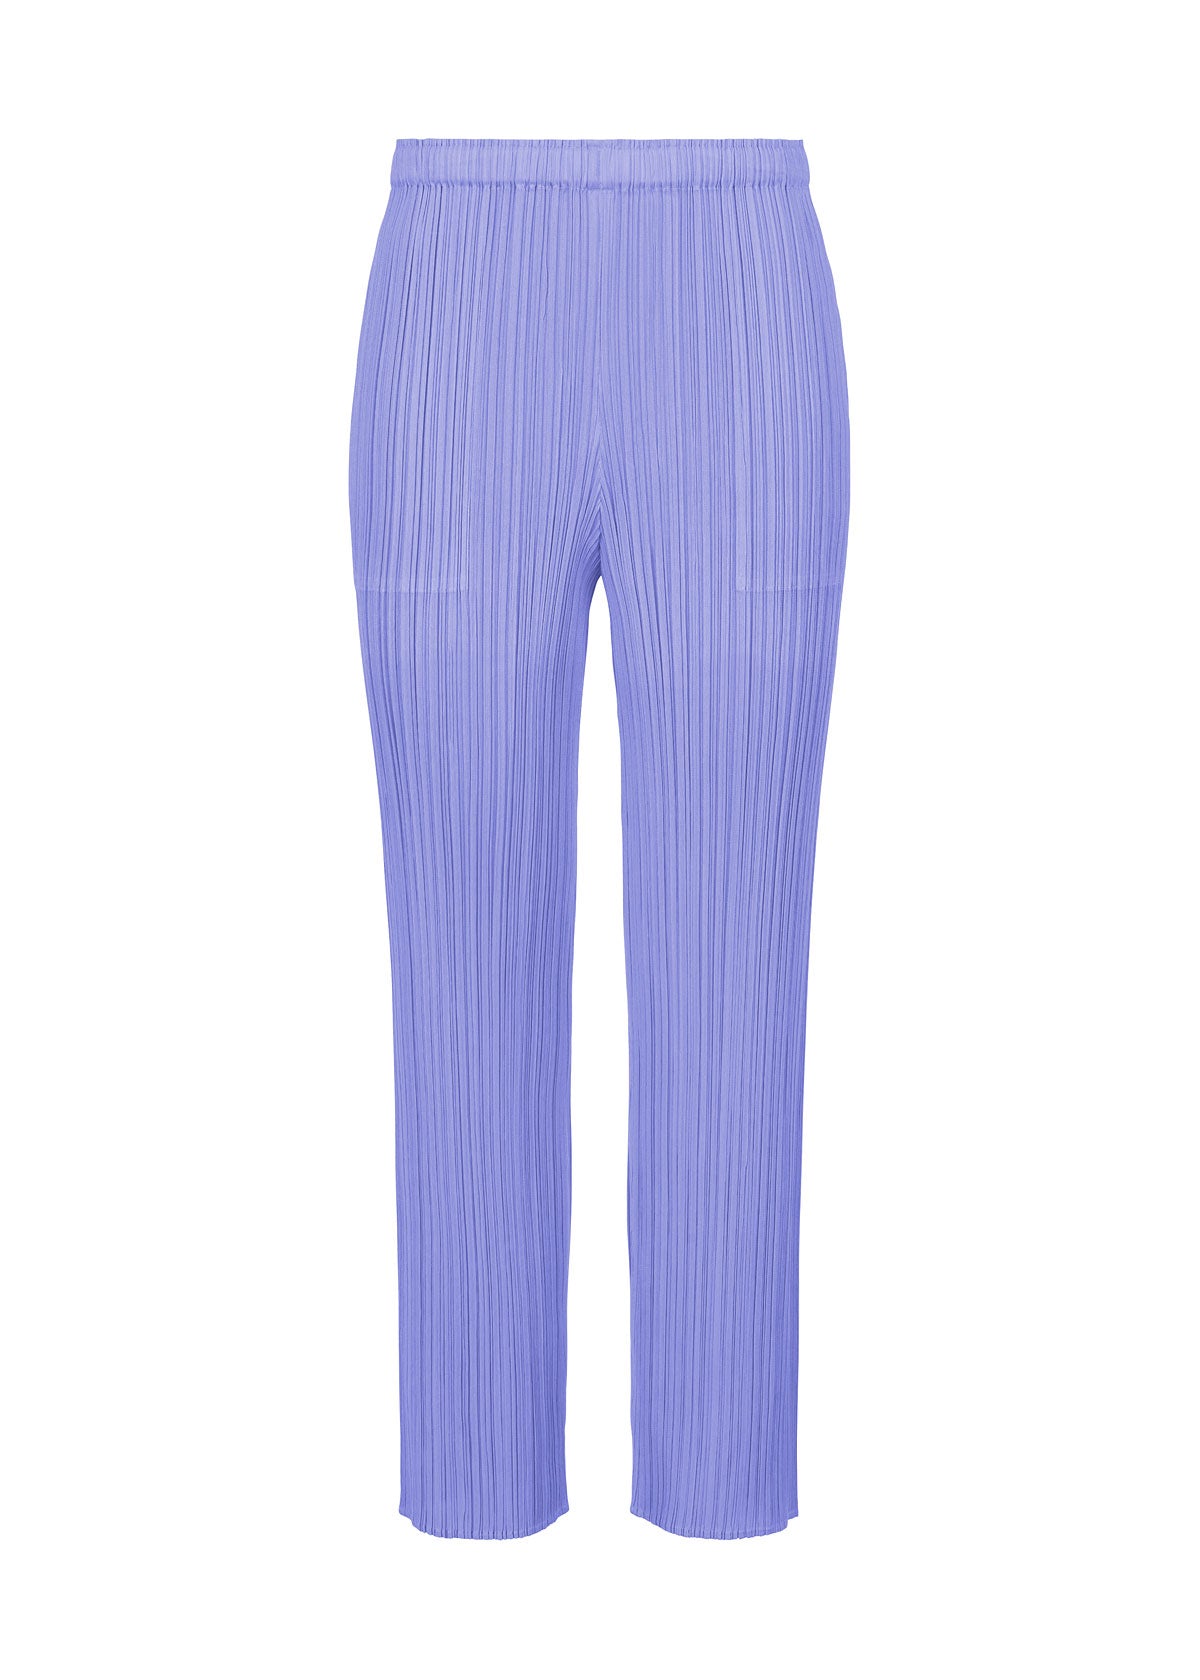 NEW COLORFUL BASICS 3 PANTS | The official ISSEY MIYAKE ONLINE 